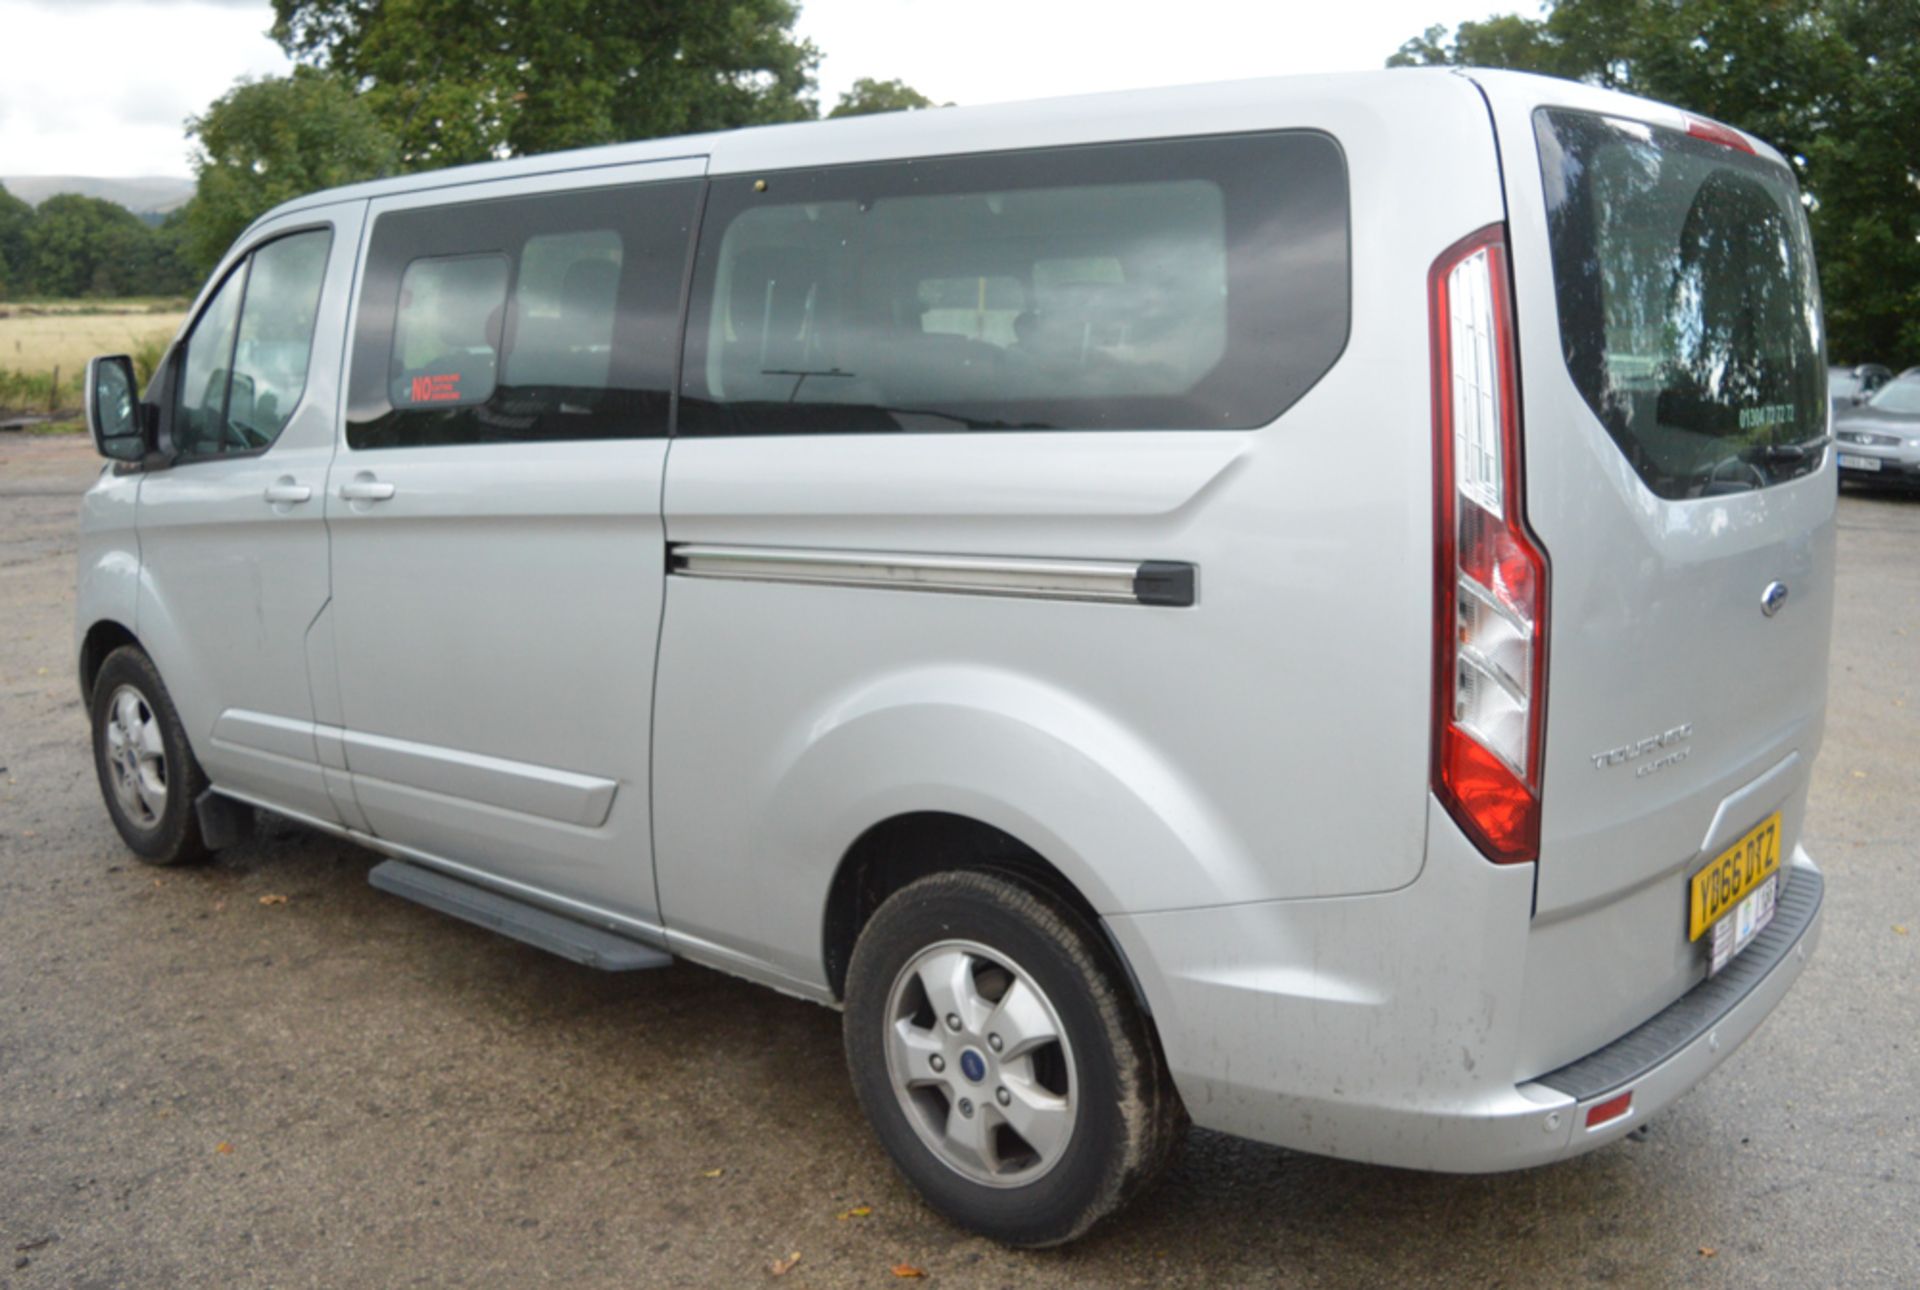 Ford Tourneo Custom 8 seat minibus  Registration Number: YD66 DTZ Date of Registration: 01/09/2016 - Image 3 of 12